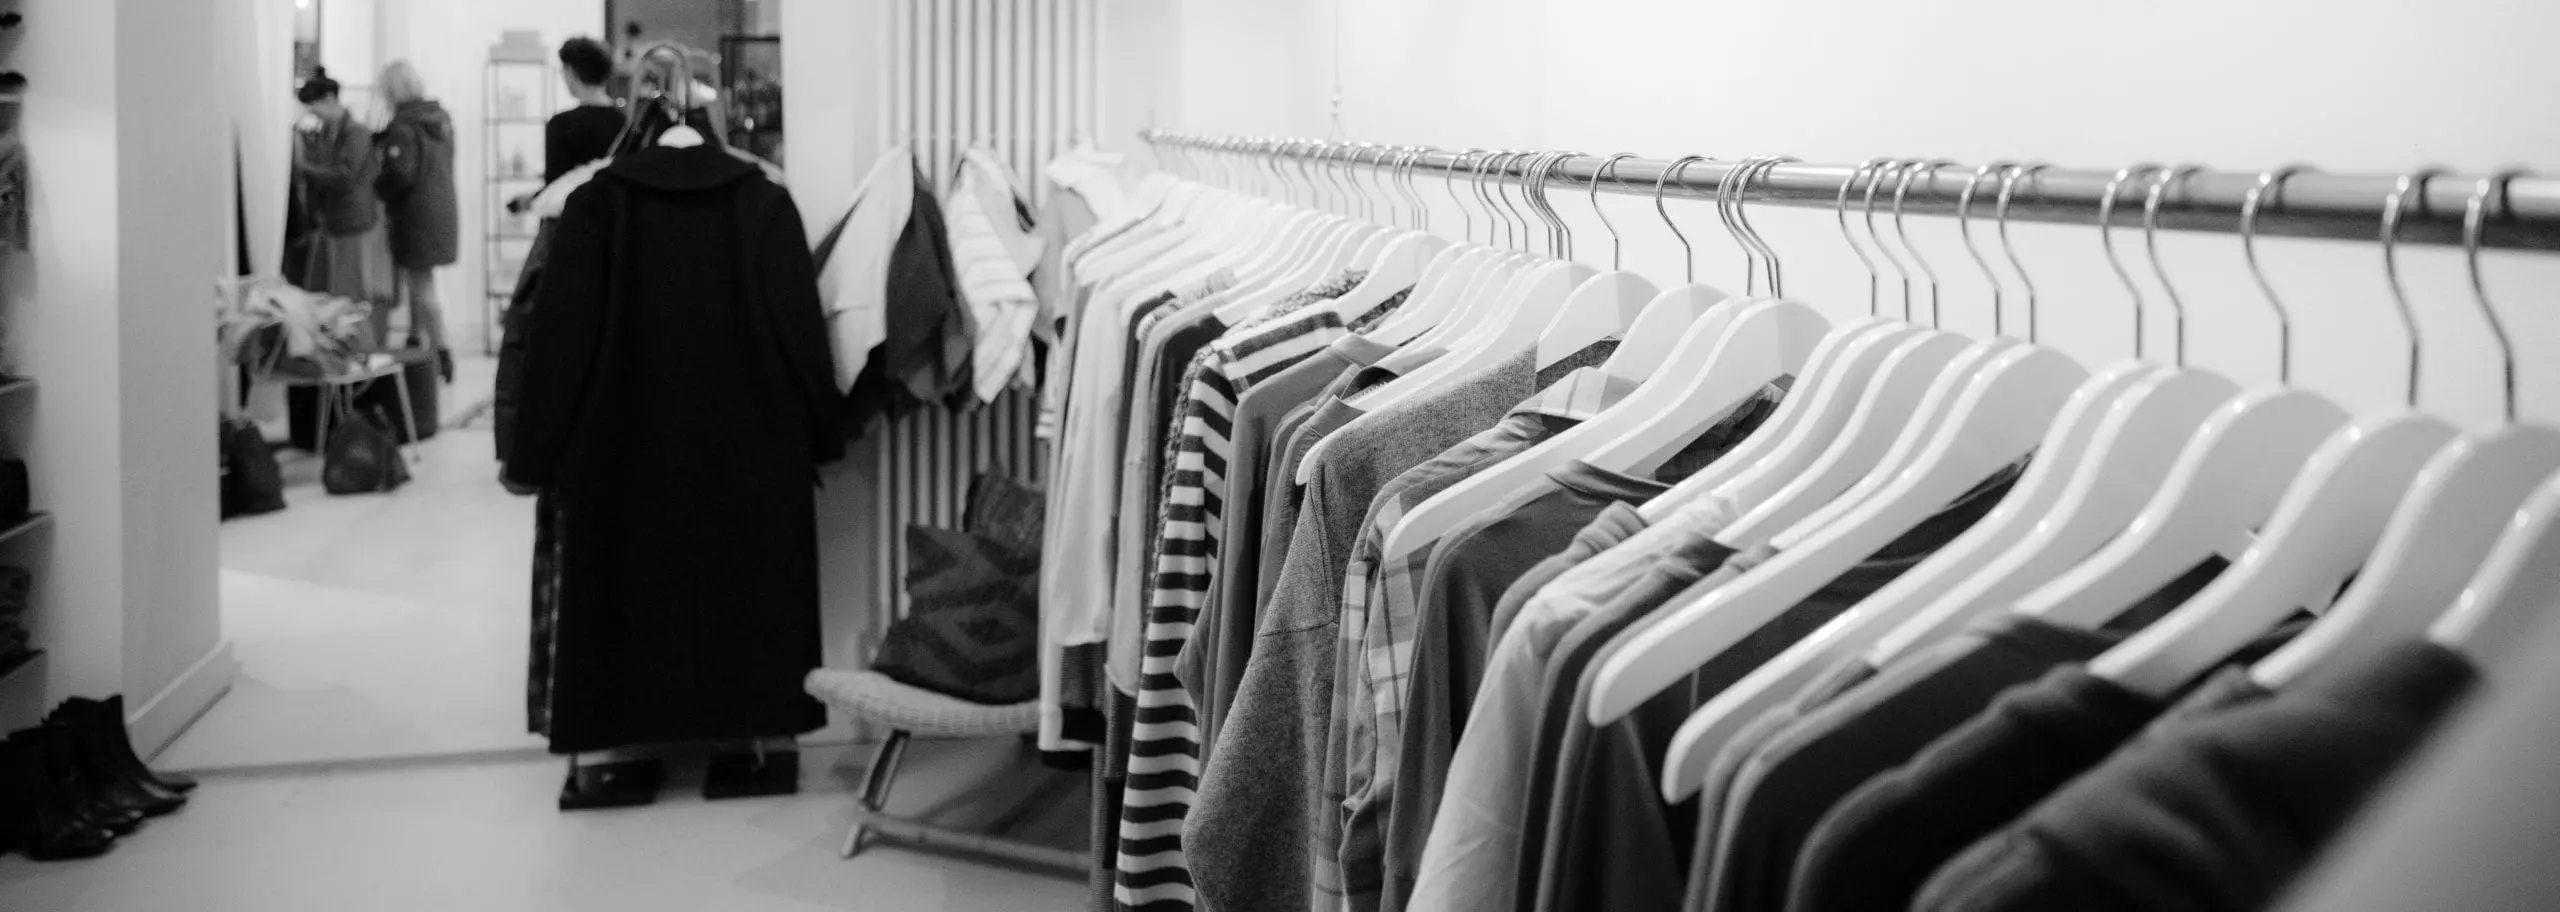 Top 3 Myths about the Clothing Industry